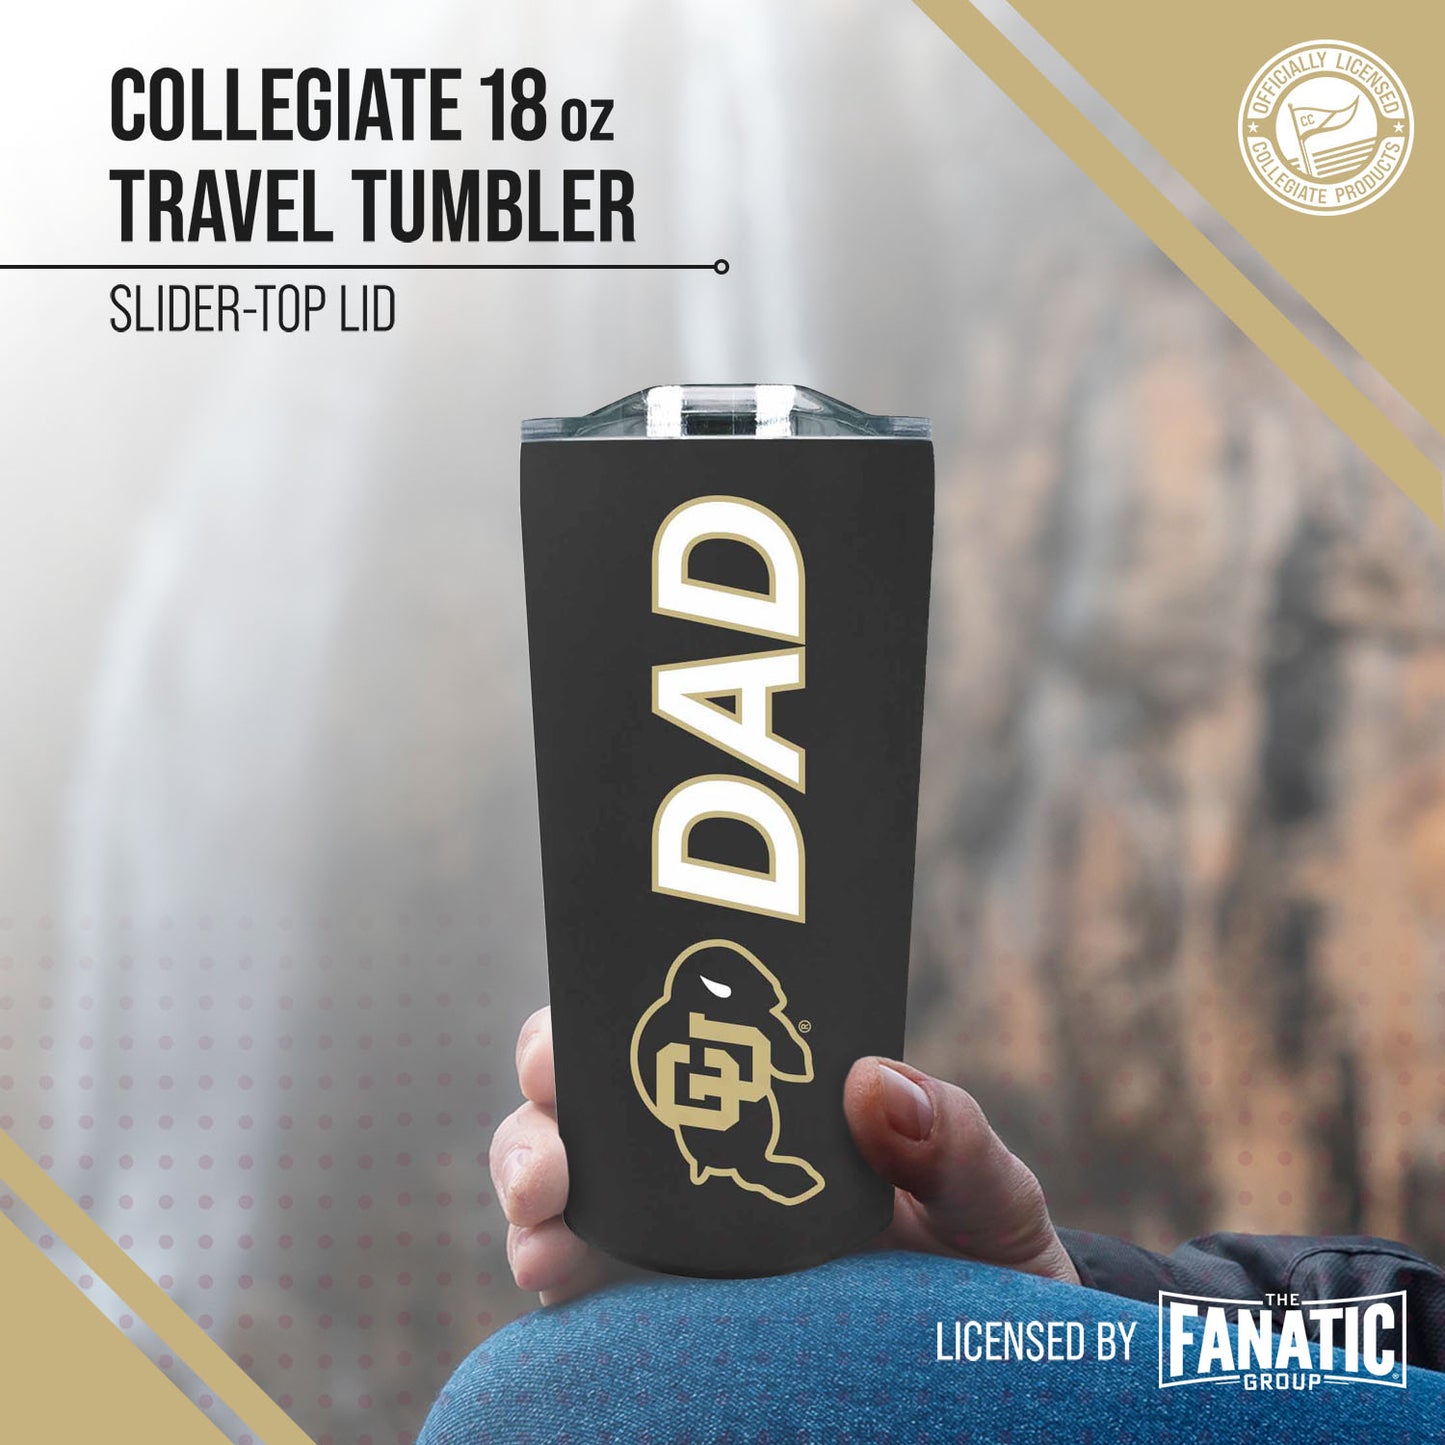 Colorado Buffaloes NCAA Stainless Steel Travel Tumbler for Dad - Black